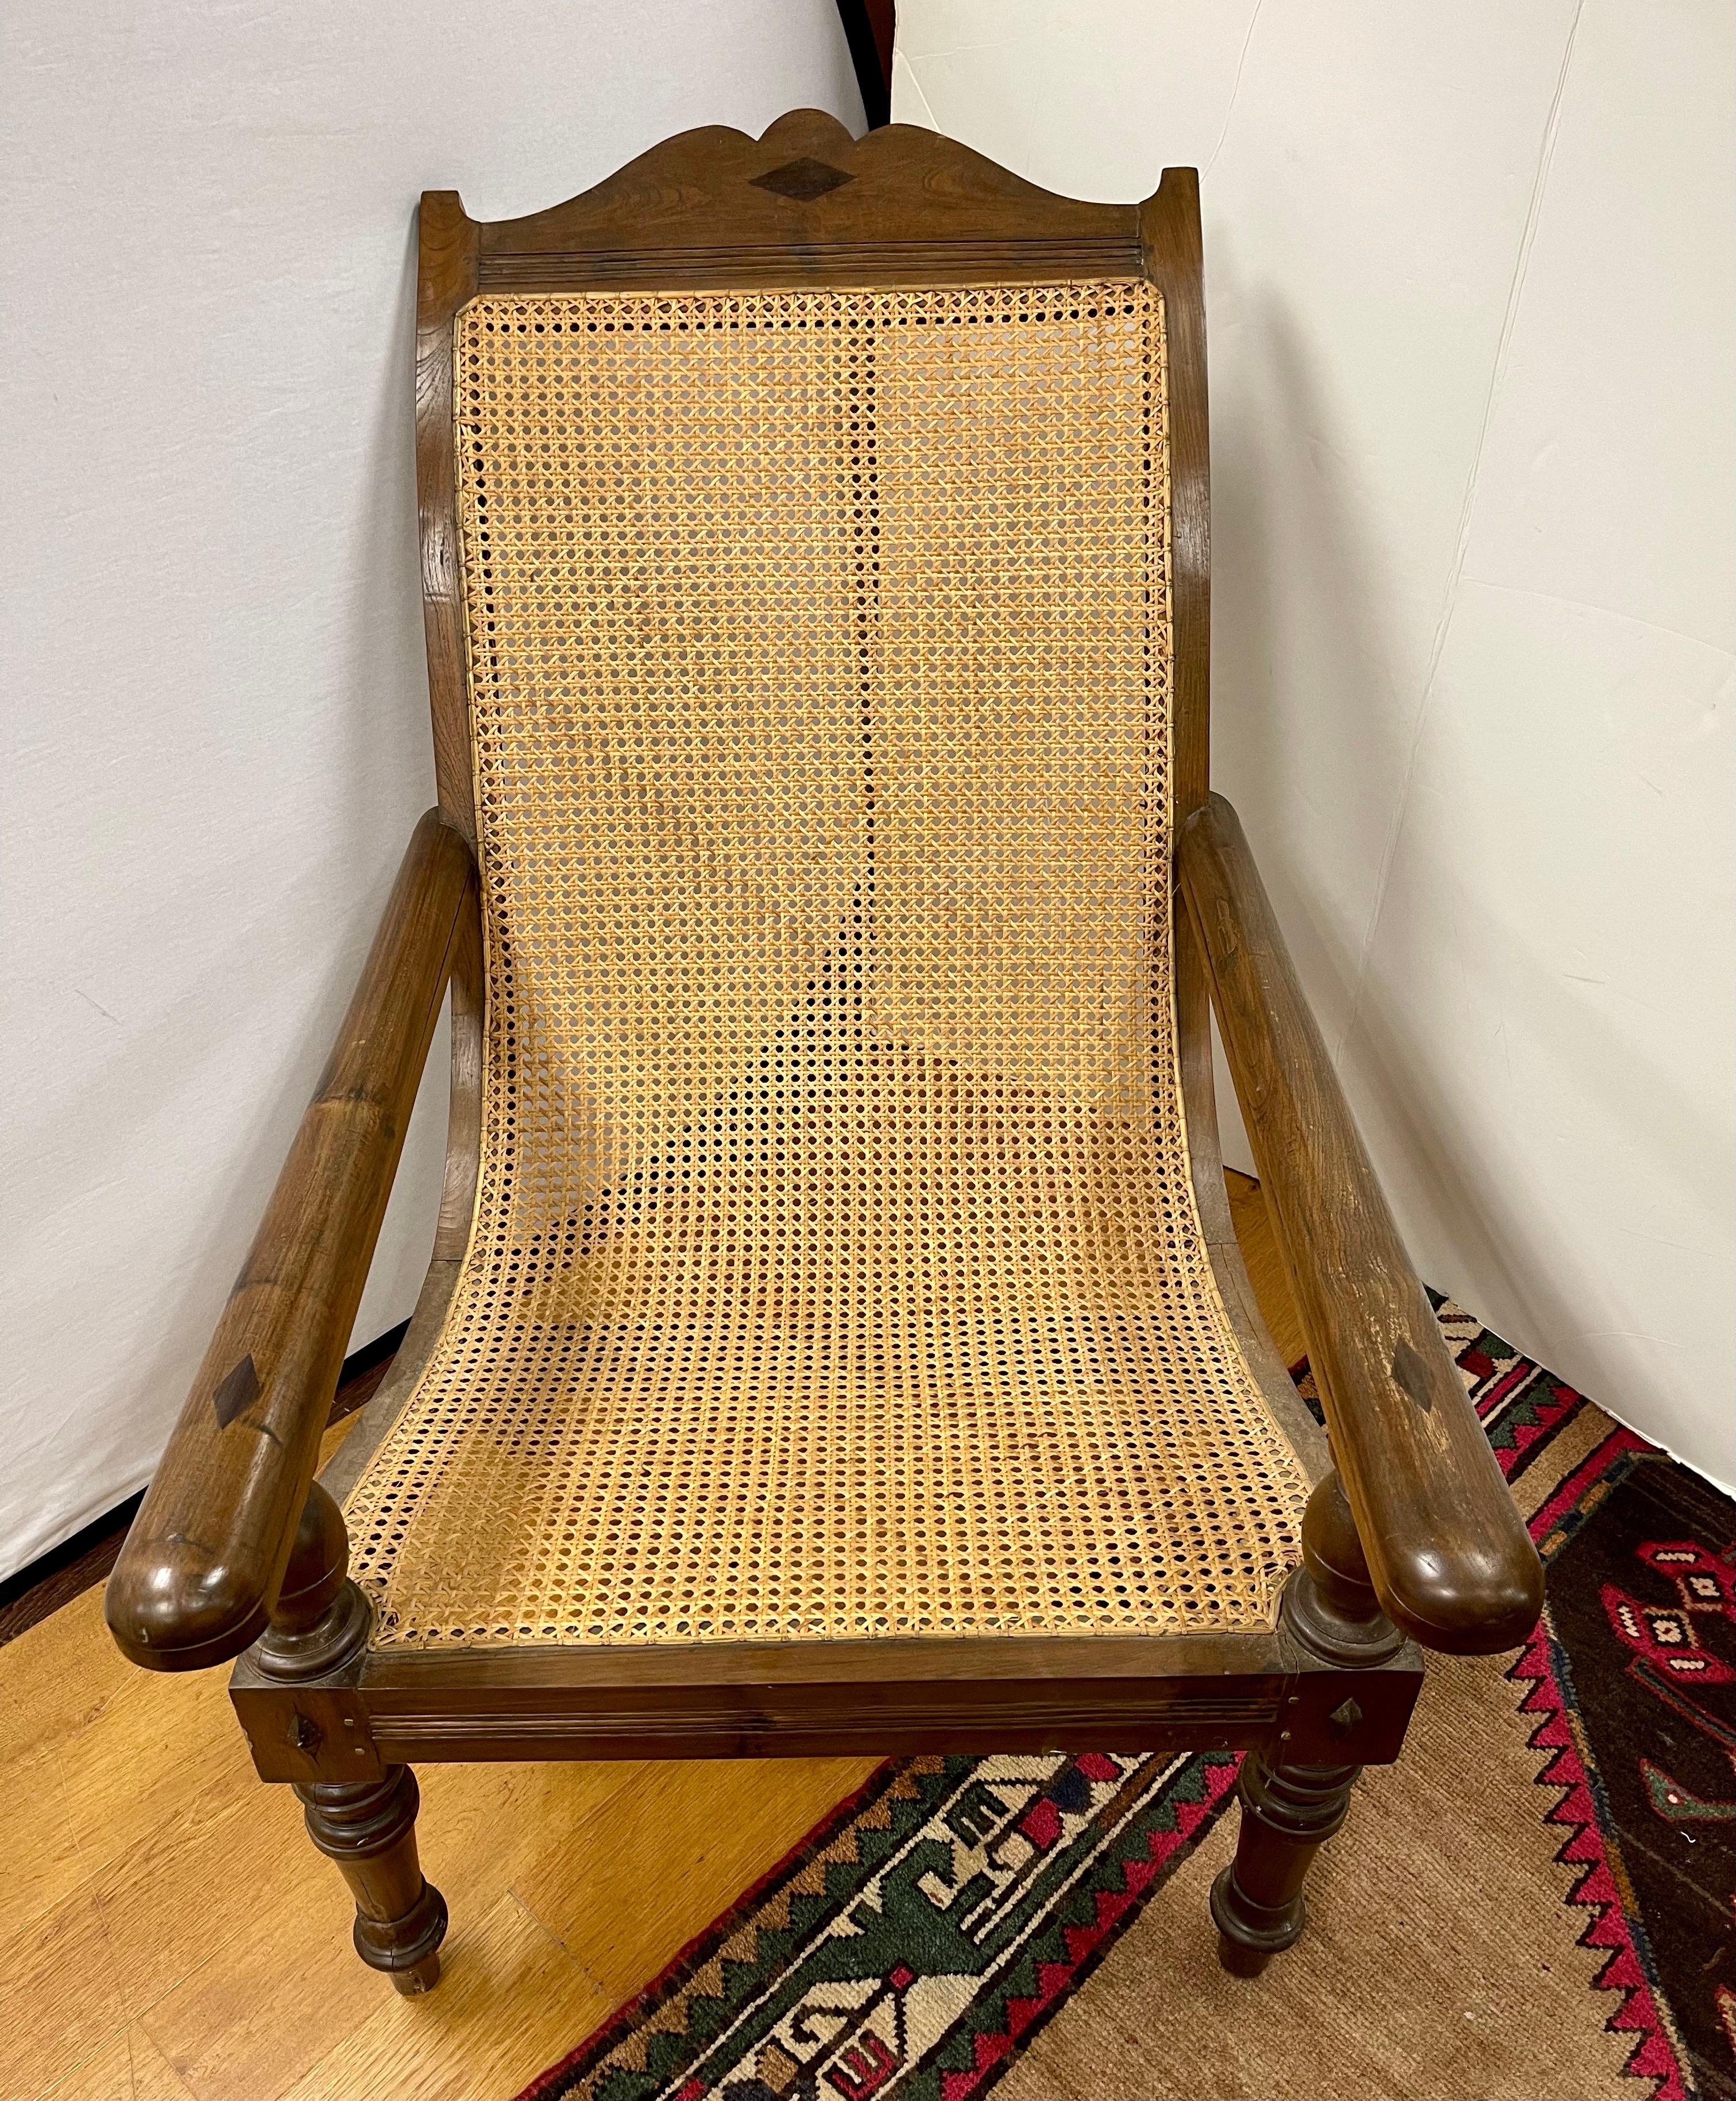 British colonial plantation chair features a carved frame with cane seat and back. Hand made with swing out extension arms that transform into leg rests and can be tucked back under the arms.